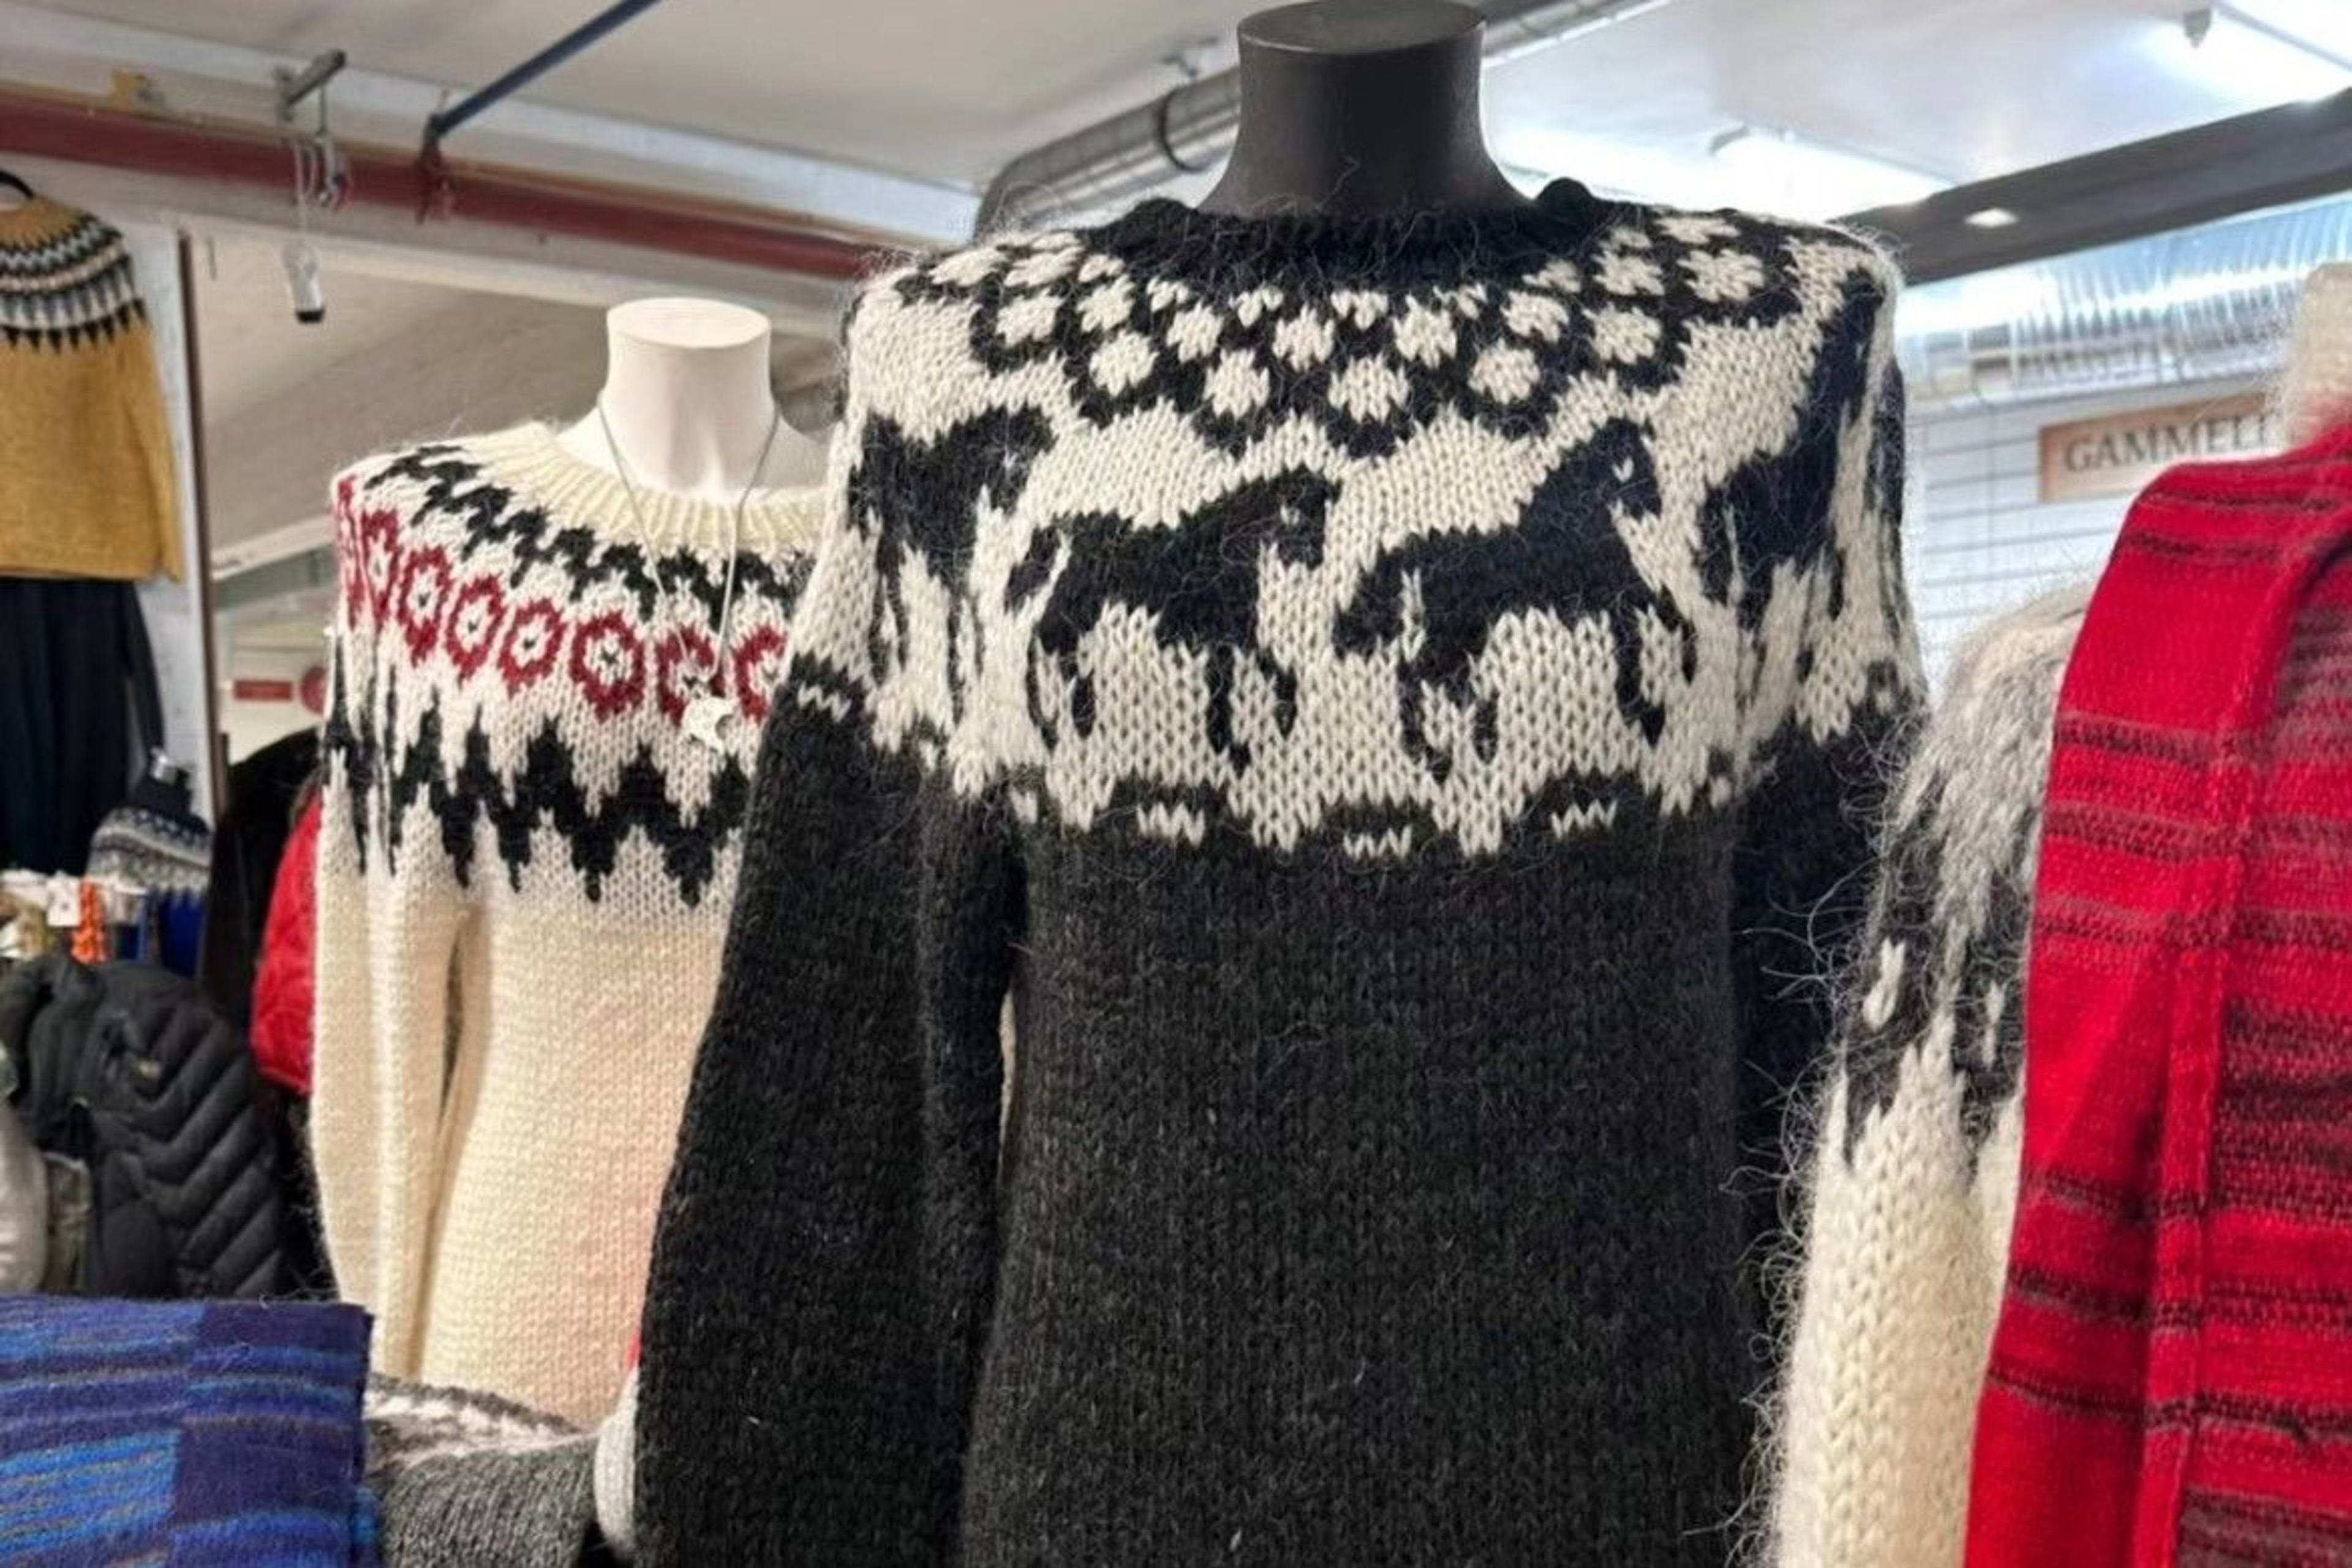 icelandic sweaters in the store